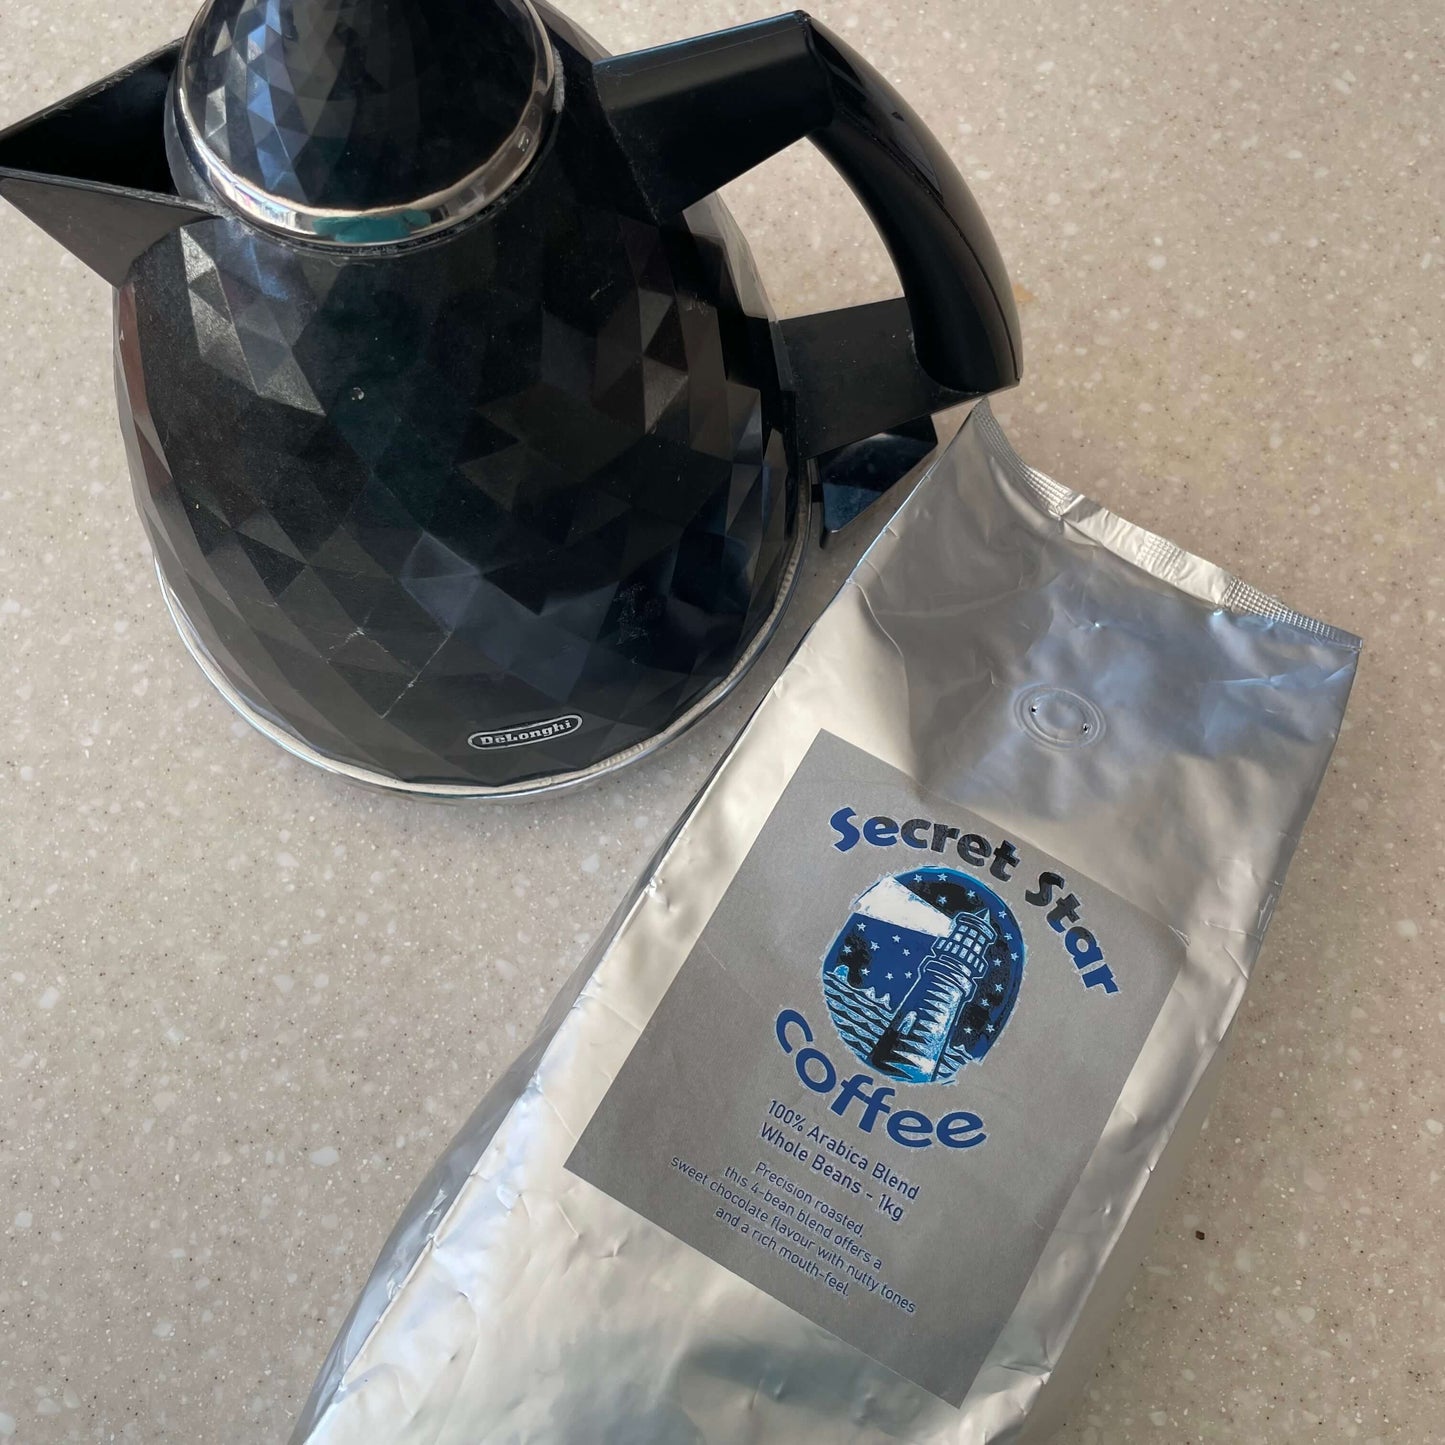 Silver bag of coffee beans with label Secret Star Coffee and a black kettle next to it.